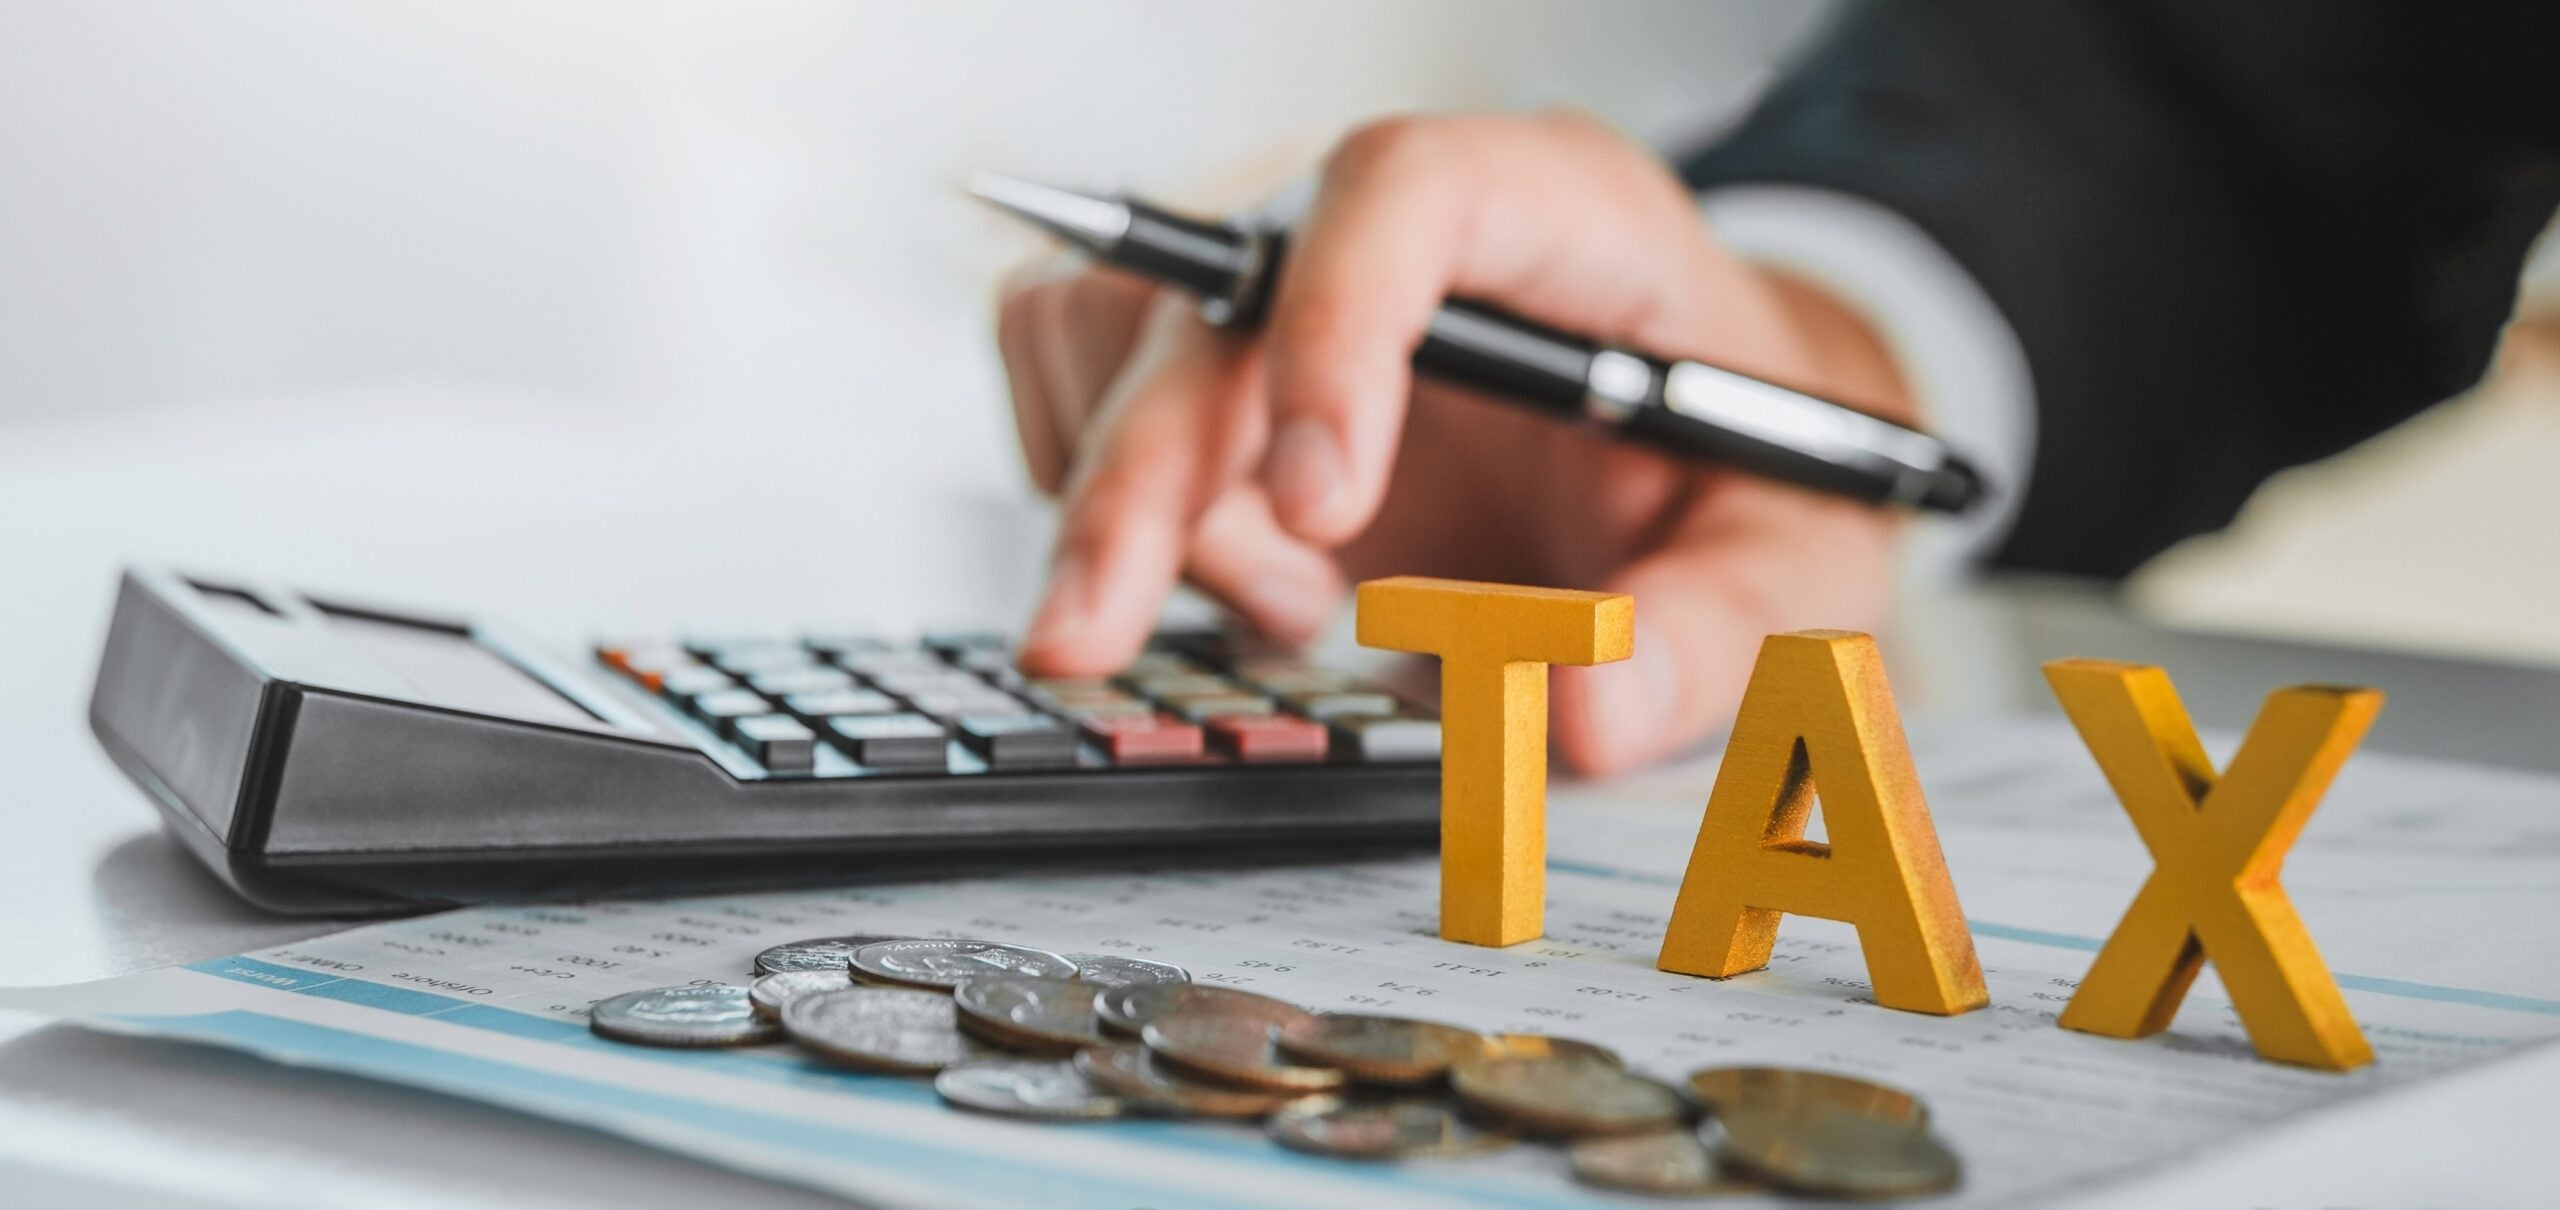 Business TAX plan development for fill in the income tax online return form for payment. Financial research,government taxes and calculation tax return concept.